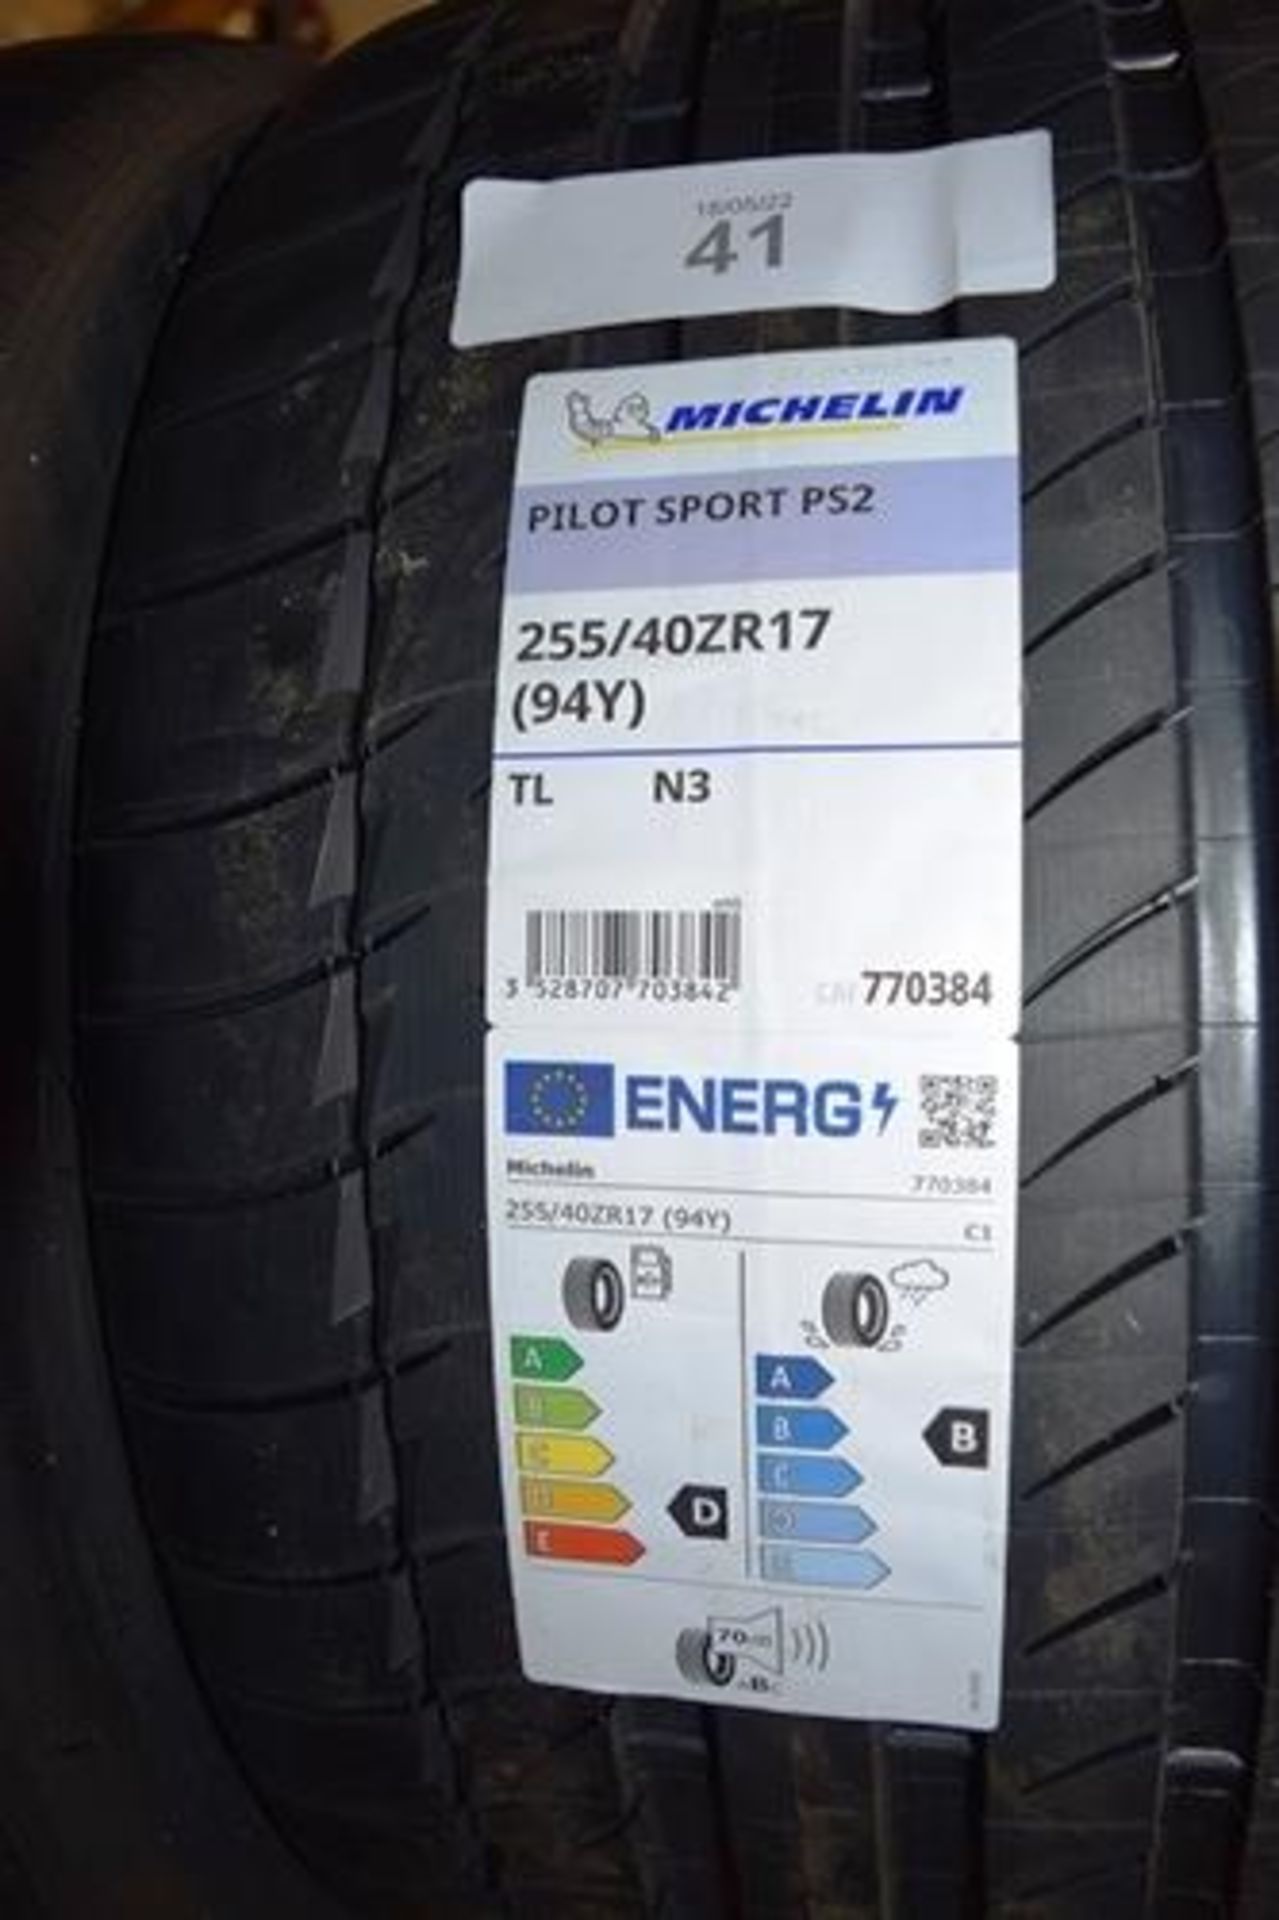 1 x pair of Michelin Pilot Sport PS2 tyres, size 255/40ZR17 94Y - New with label (GS5end)